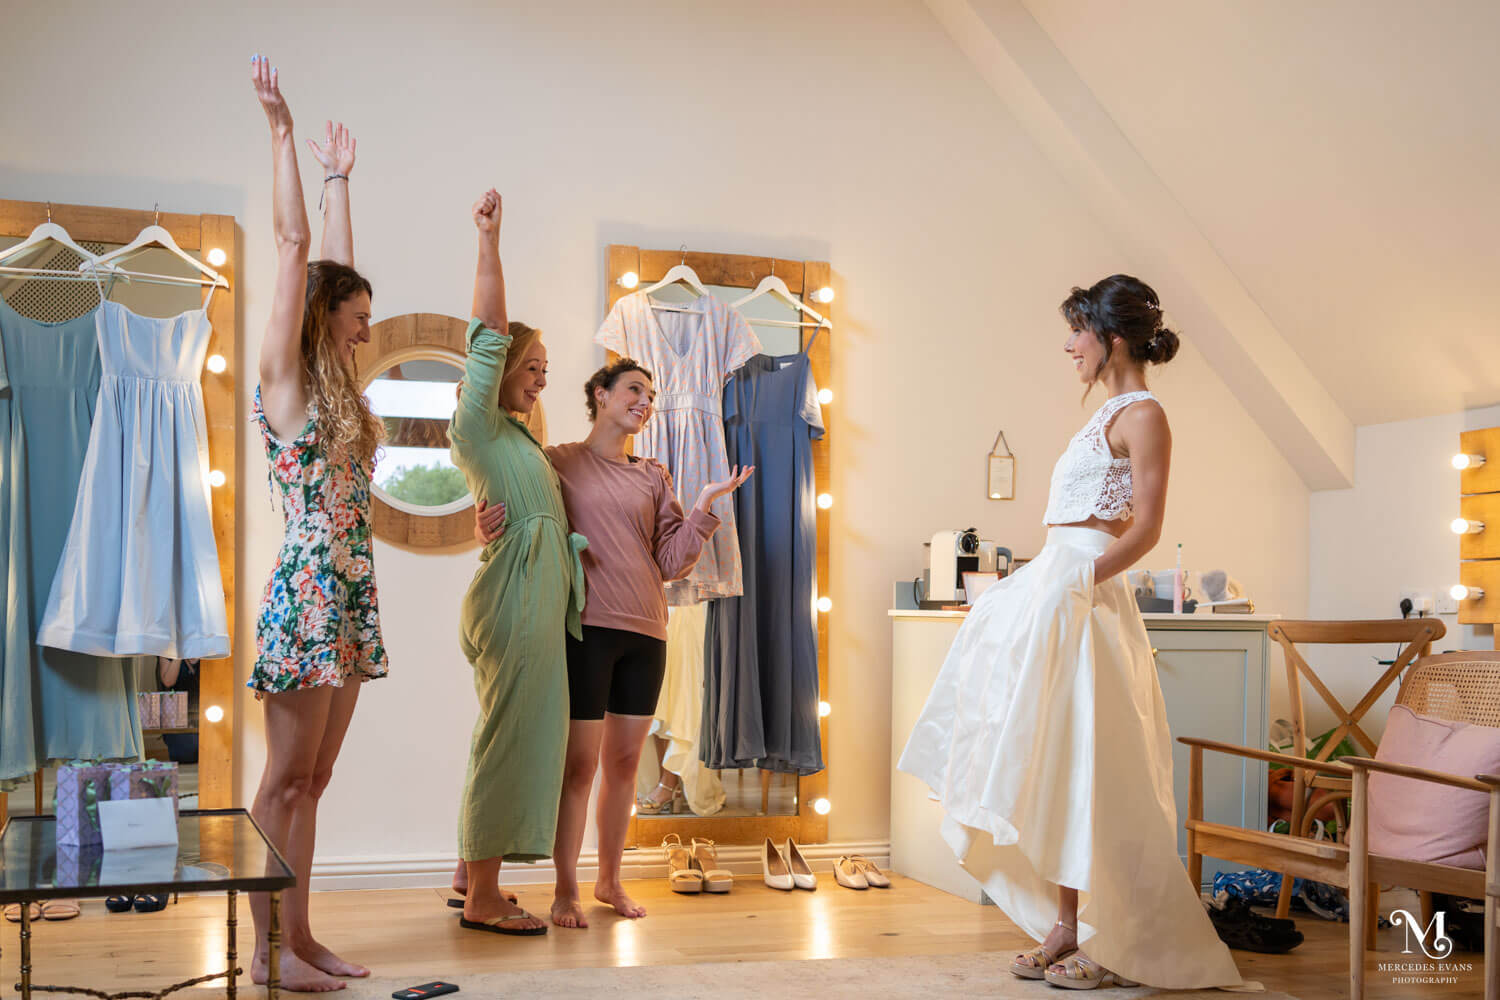 the bride shows off the pockets in her wedding skirt to her best girl friends